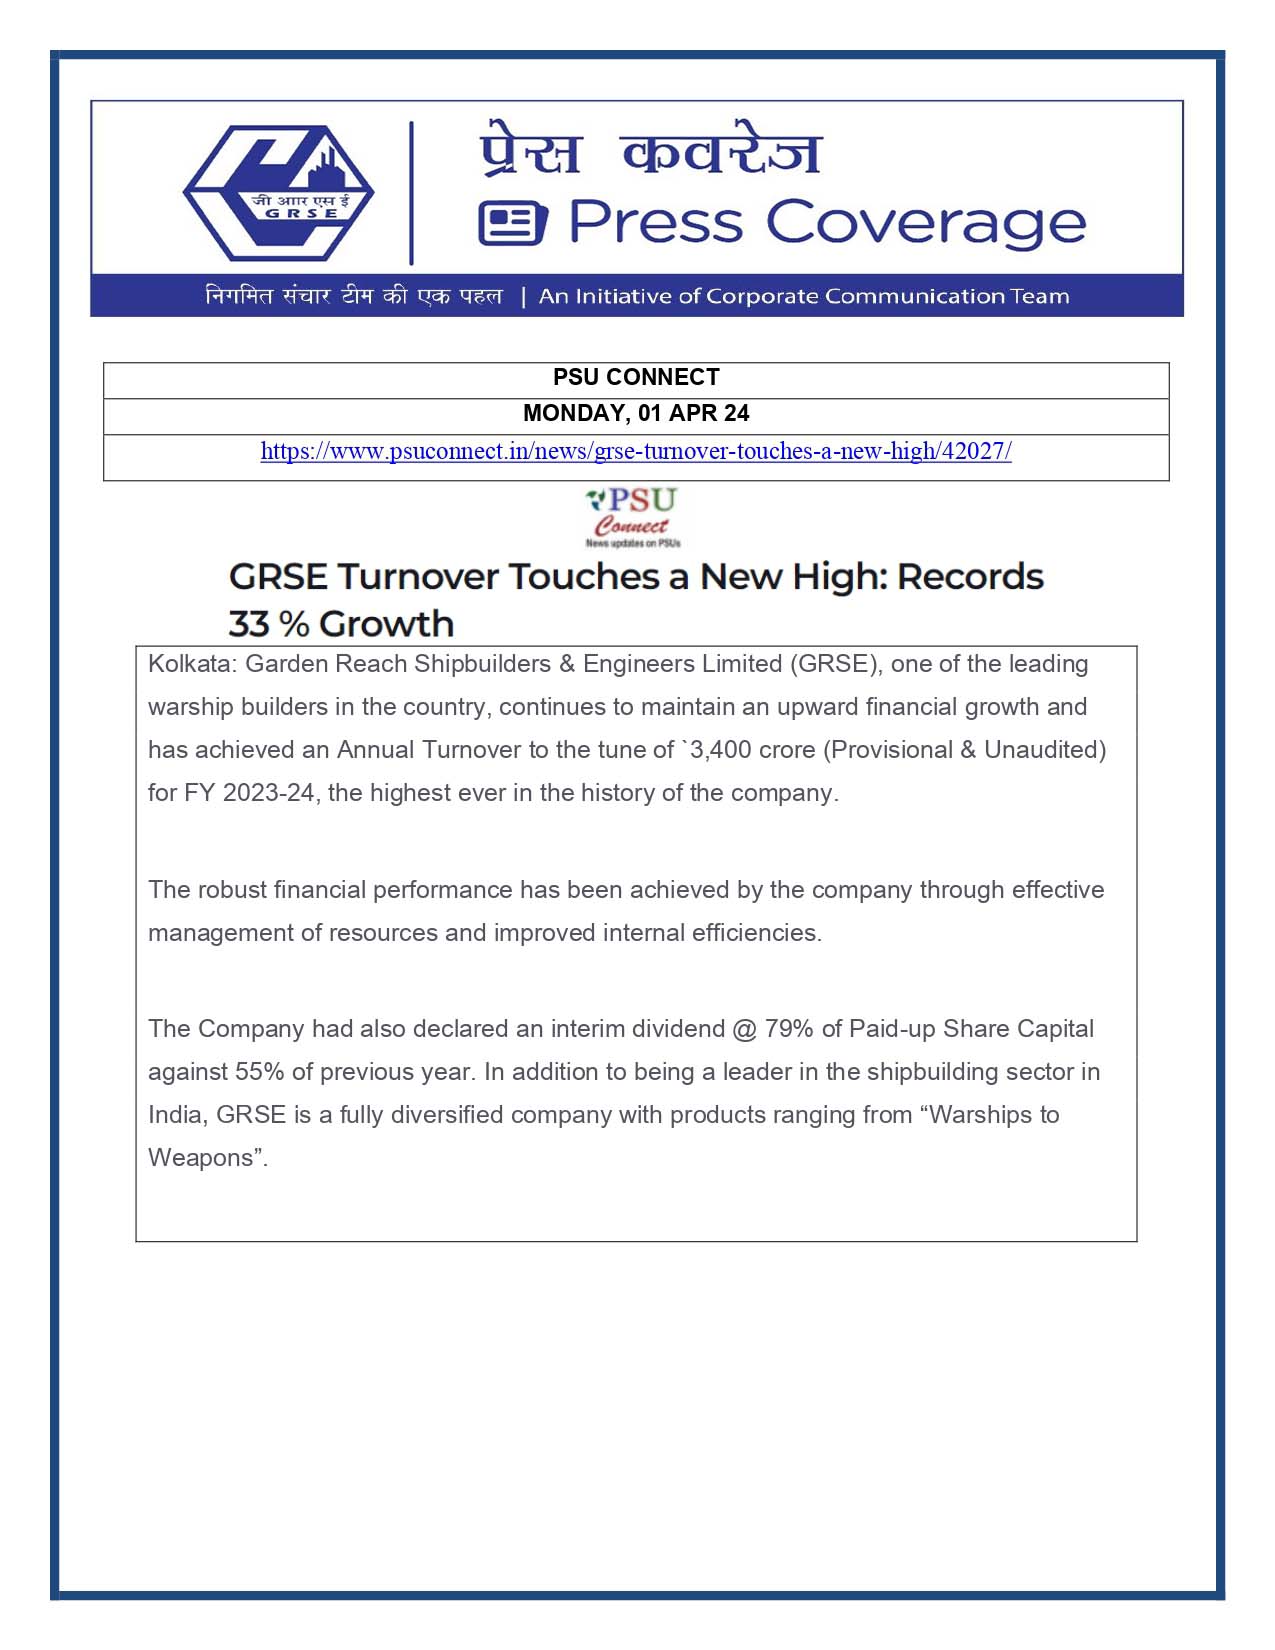 Press Coverage : PSU Connect, 01 Apr 24 : GRSE Turnover Touches New High : Records 33% Growth